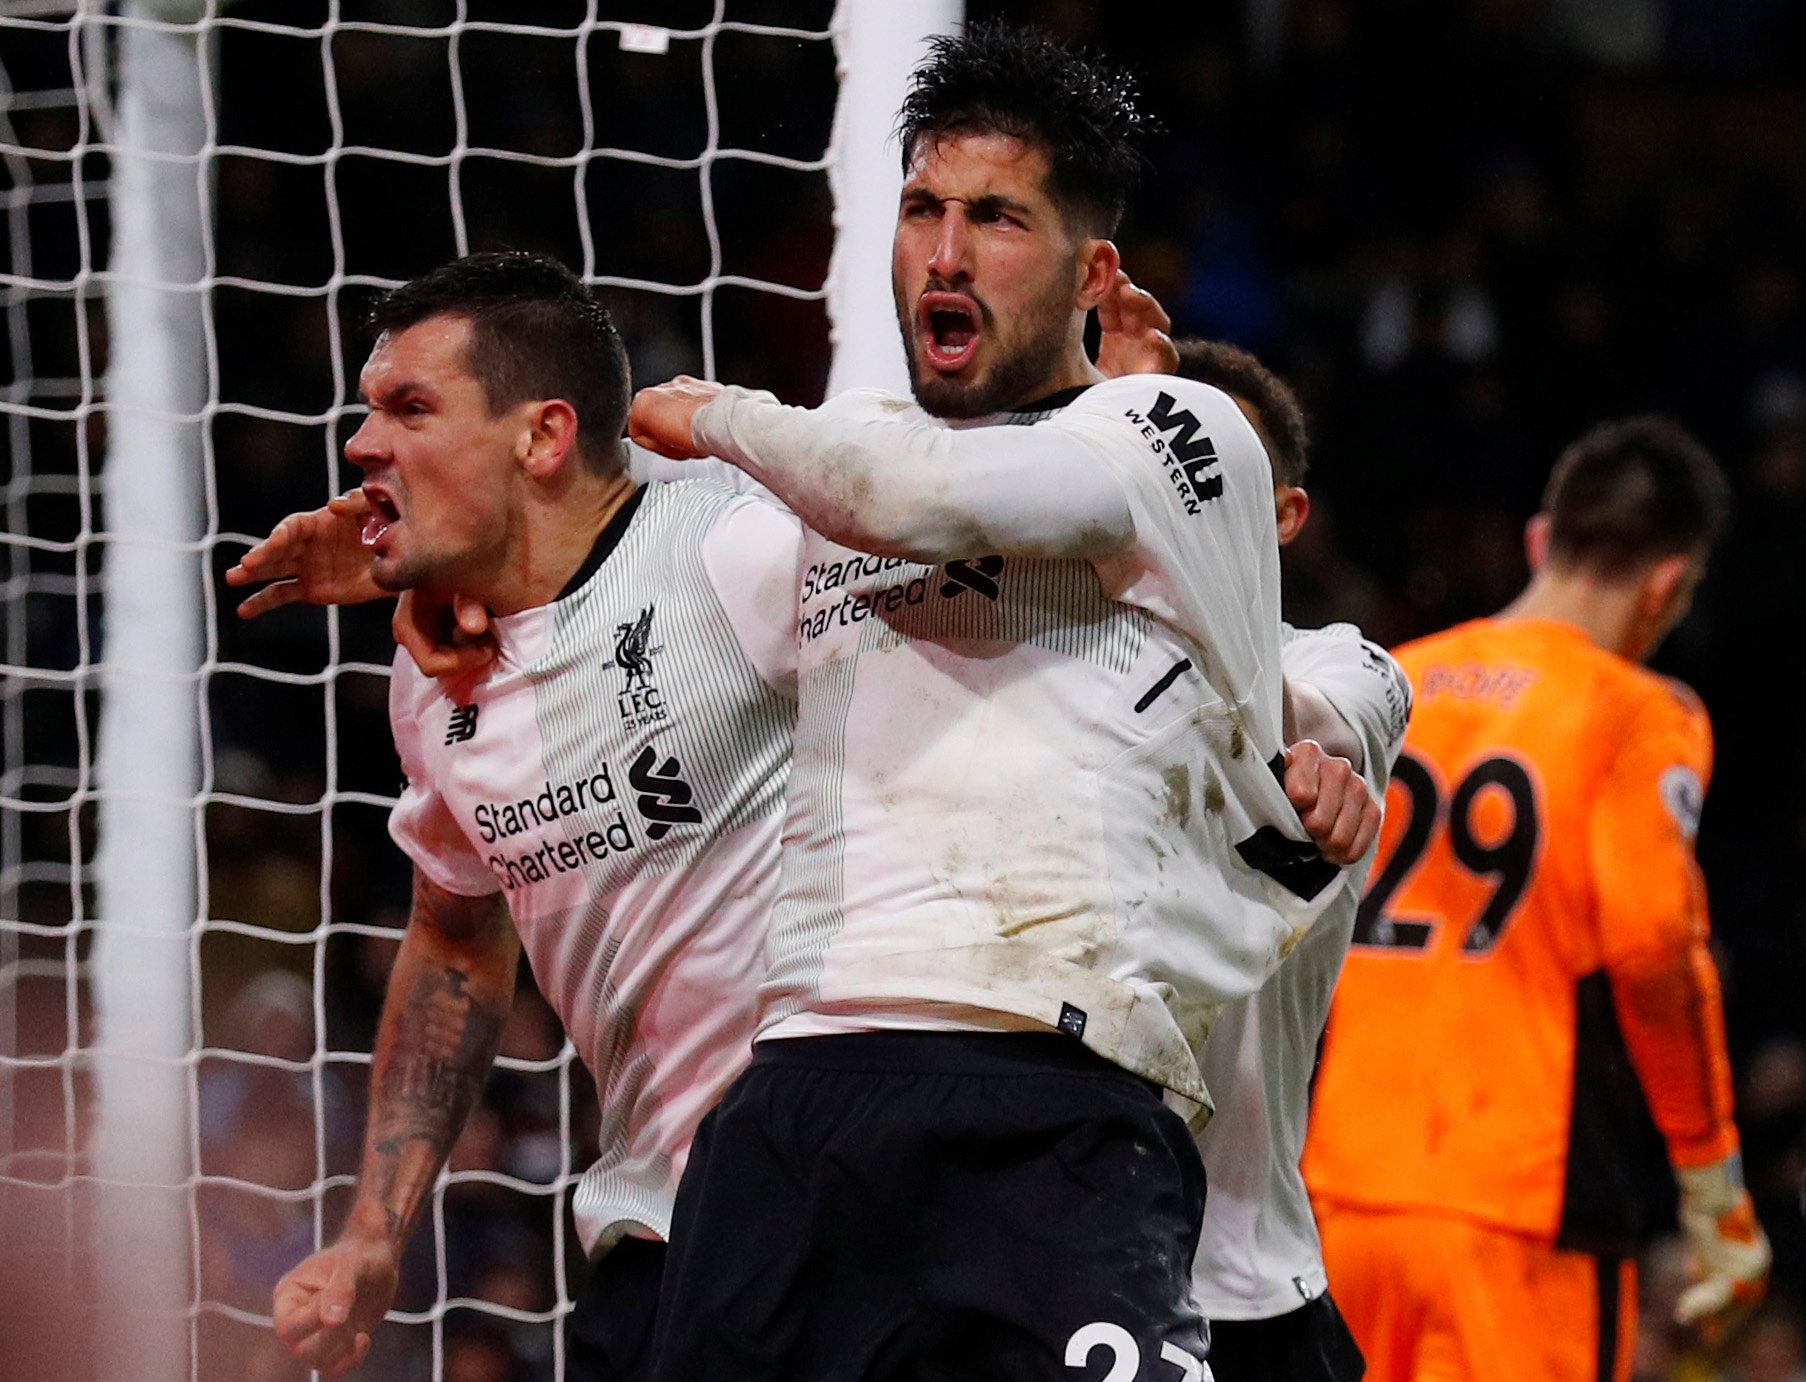 Soccer Football - Premier League - Burnley vs Liverpool - Turf Moor, Burnley, Britain - January 1, 2018   Liverpool's Dejan Lovren and Emre Can celebrates after Ragnar Klavan scored their second goal        REUTERS/Phil Noble    EDITORIAL USE ONLY. No use with unauthorized audio, video, data, fixture lists, club/league logos or 